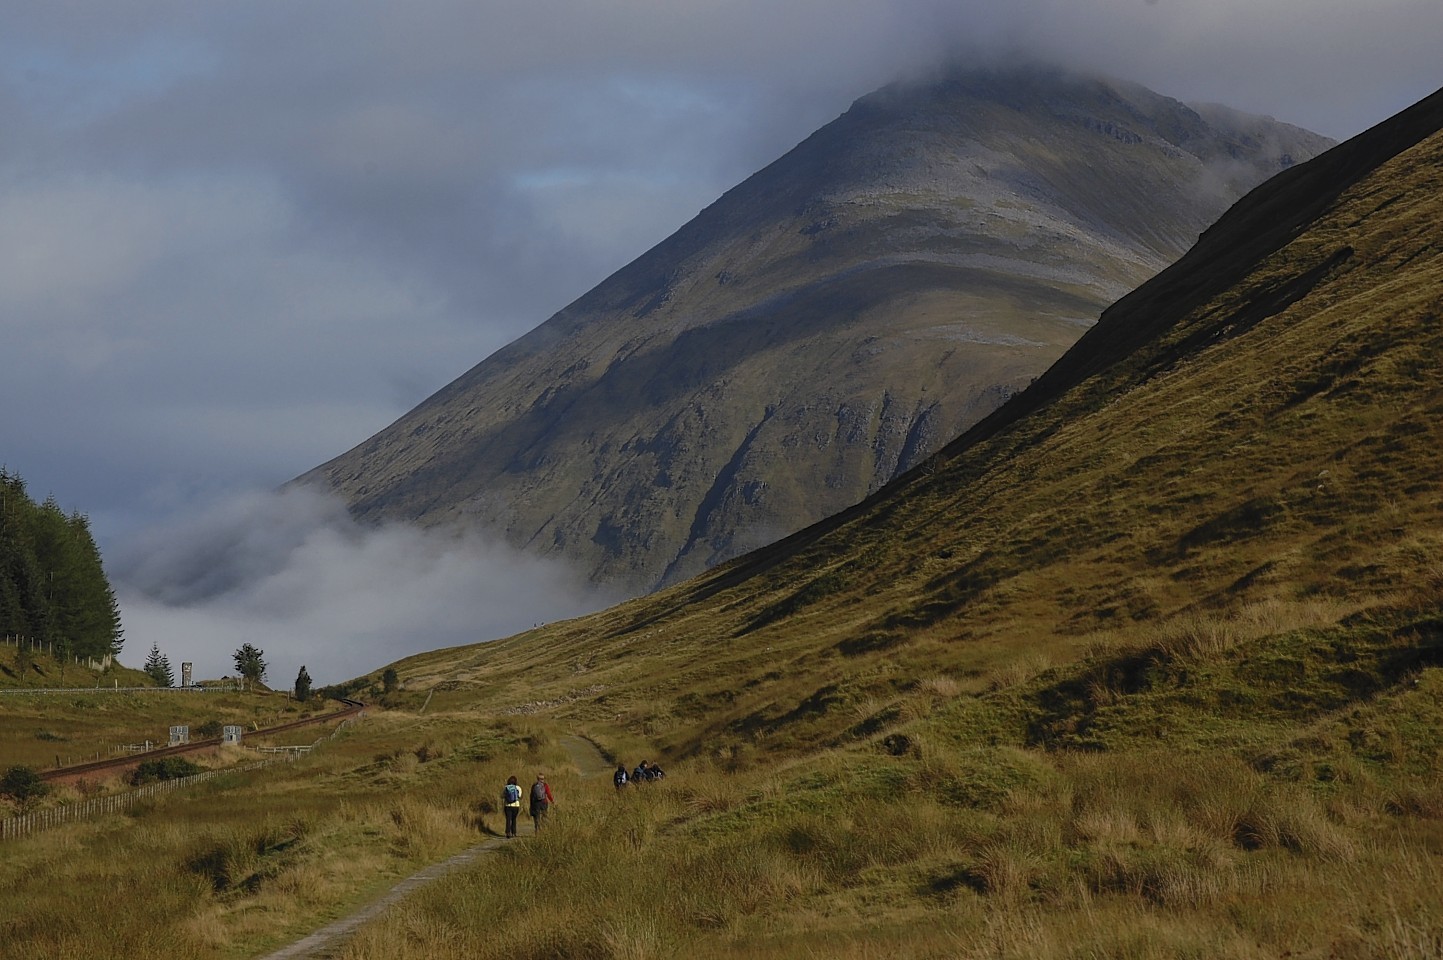 The West Highland Way provides some quite stunning views